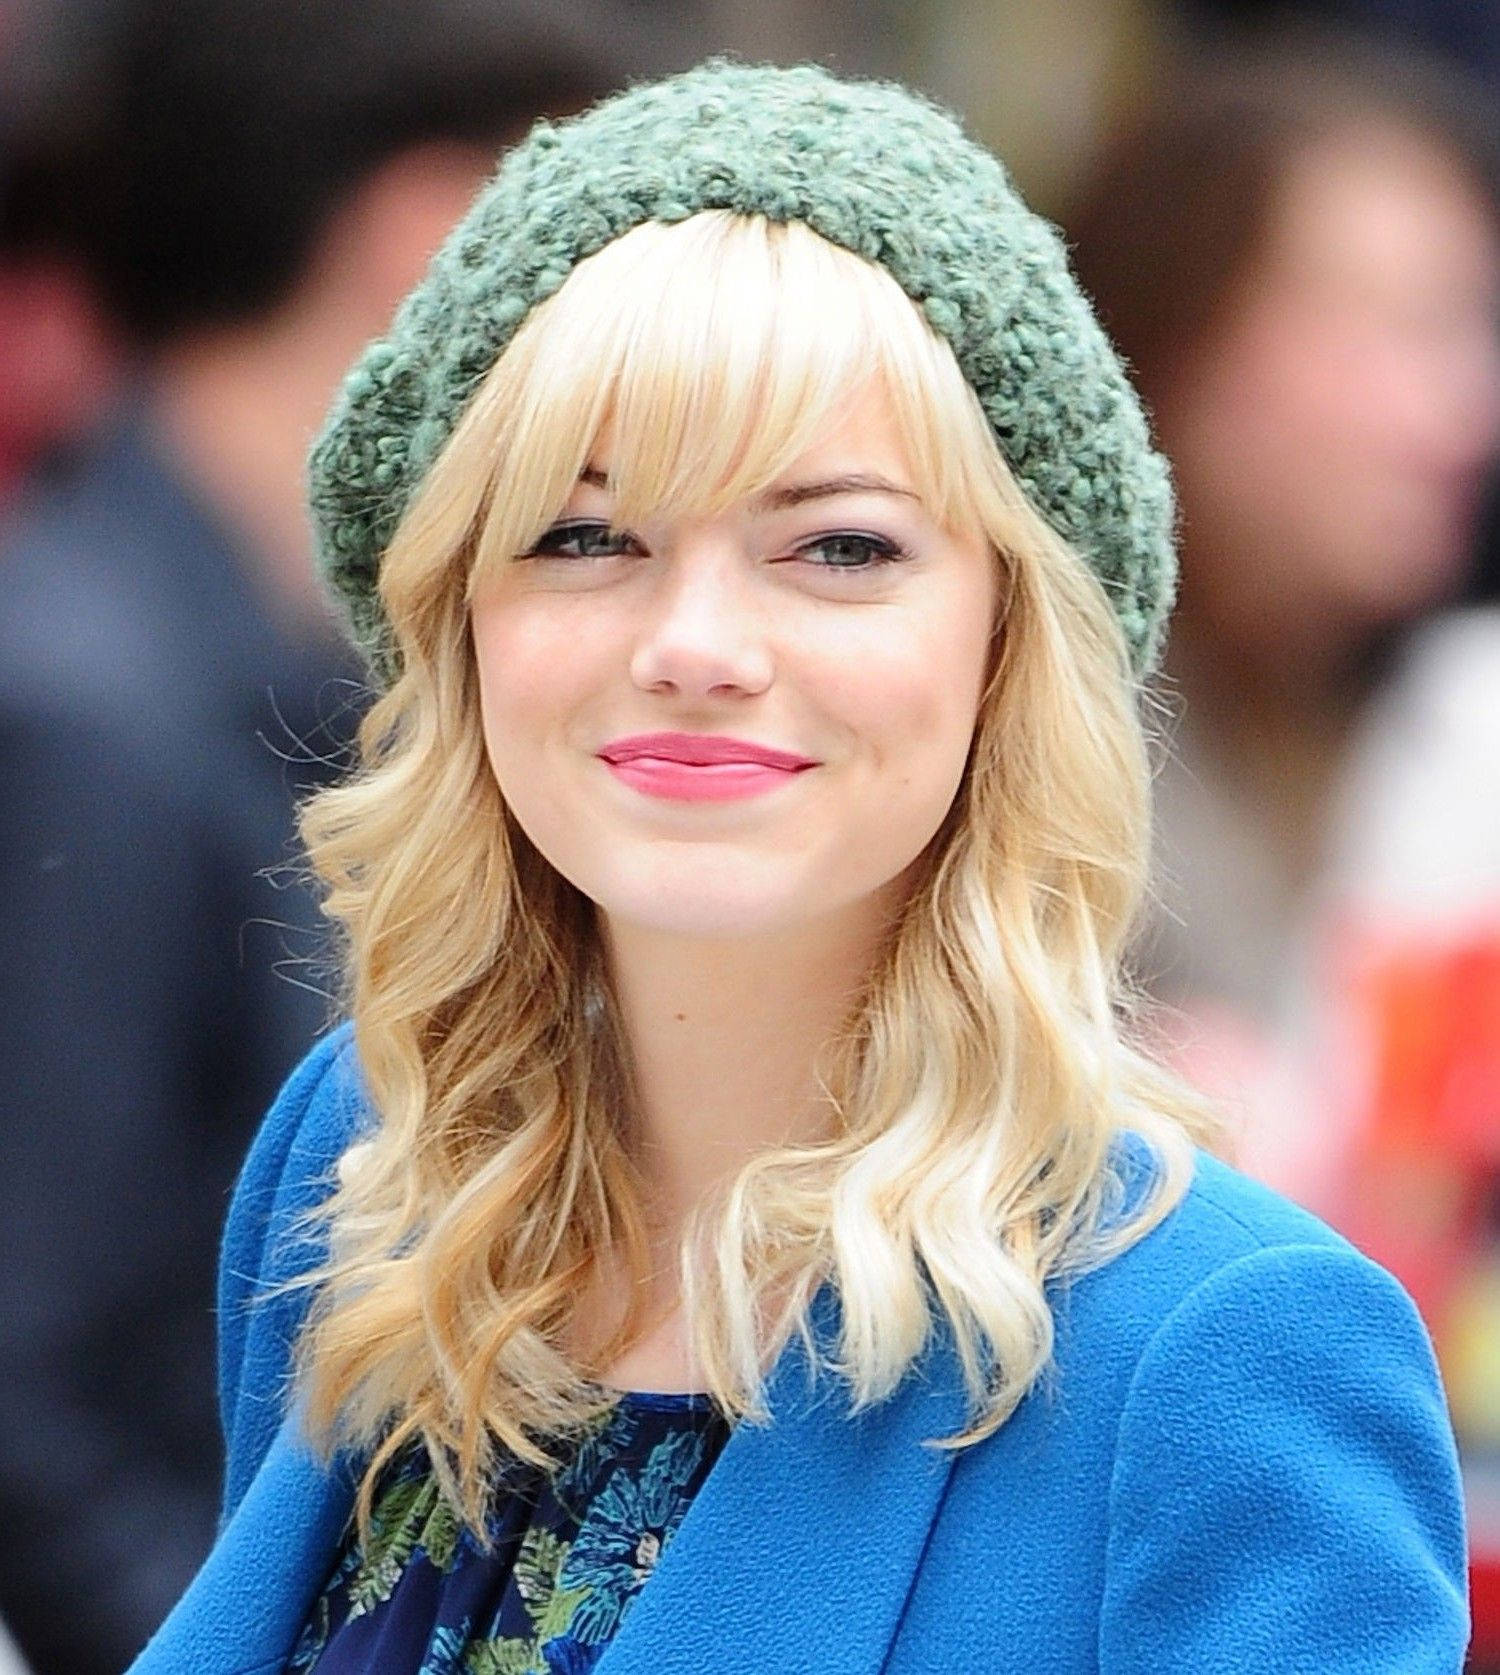 Emma Stone Exudes Confidence In A Classic Military Inspired Look.